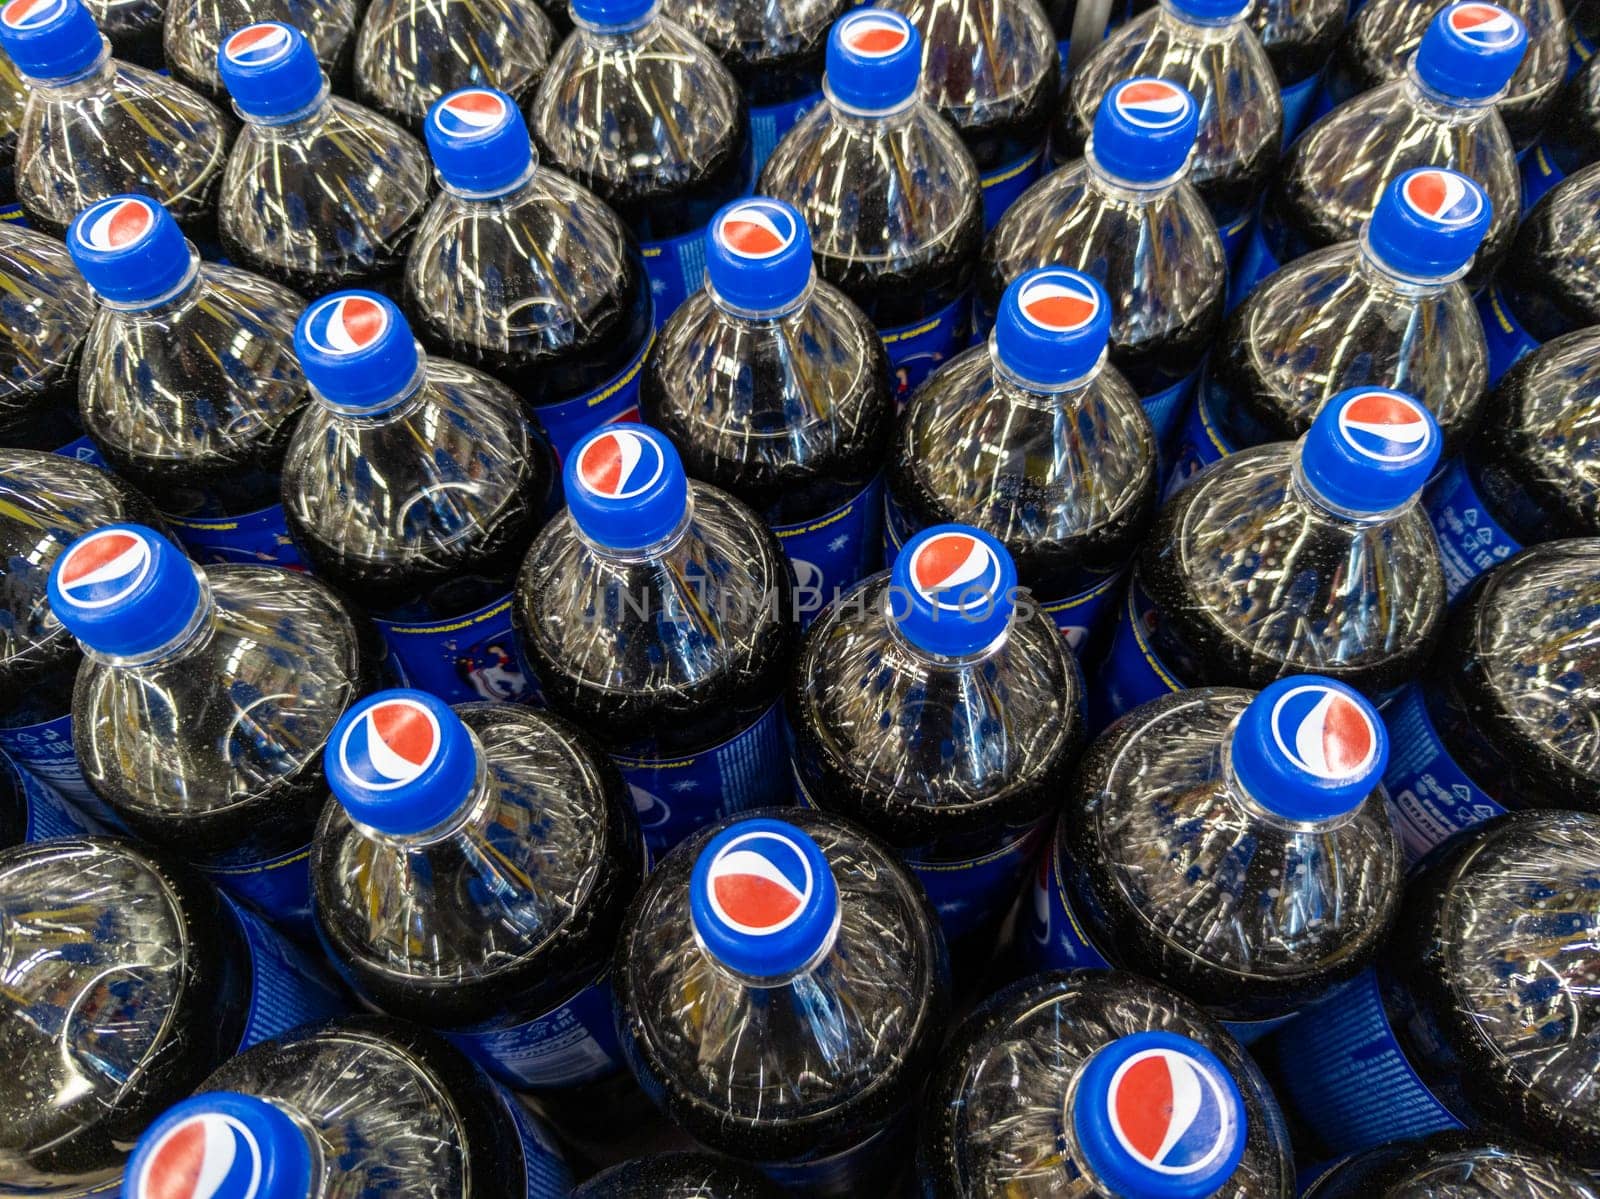 Rows of plastic Pepsi bottles, close-up full-frame high angle view by z1b